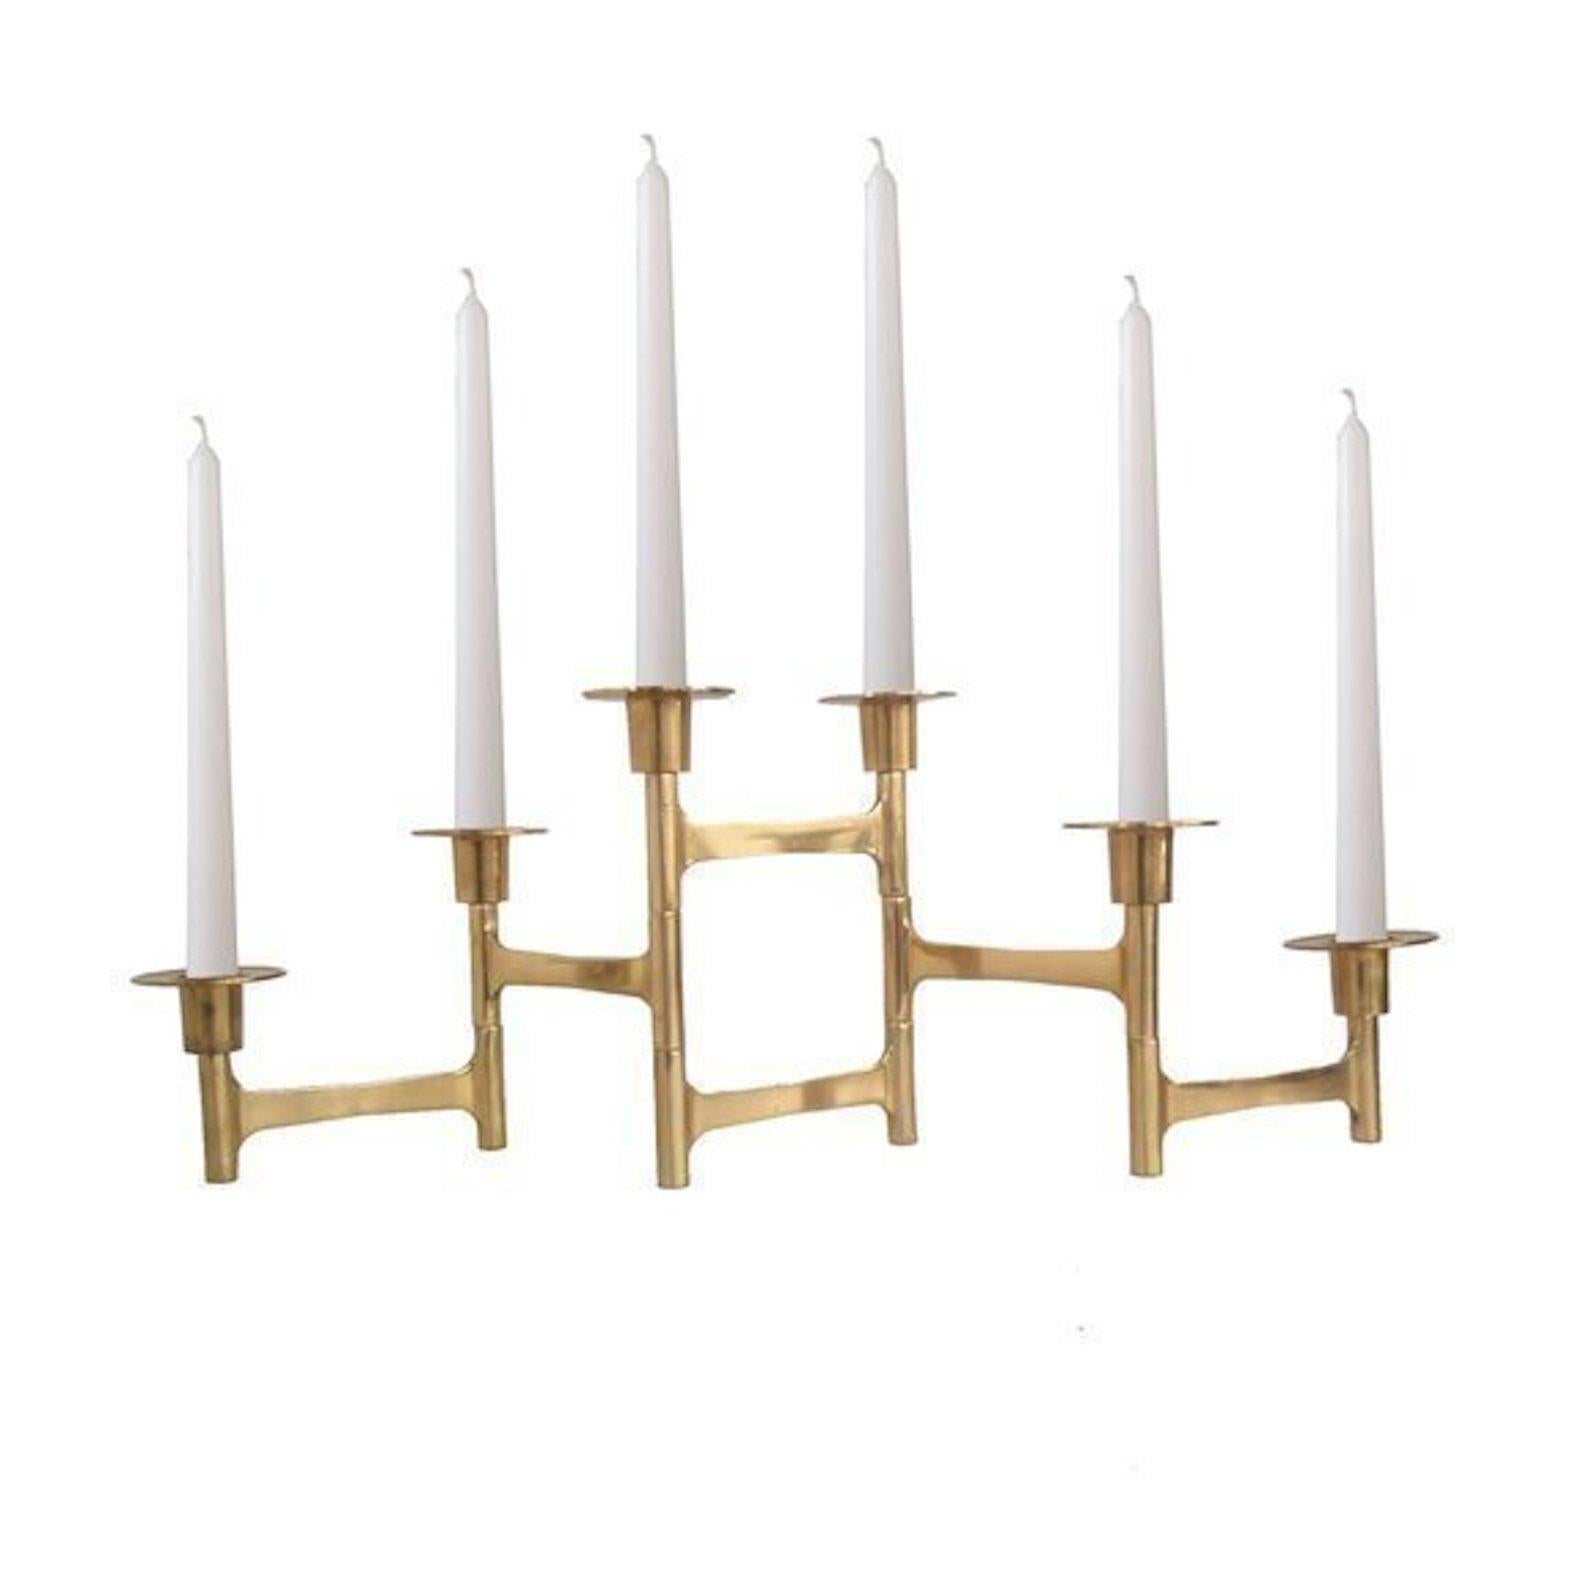 Midcentury Danish brass articulating candle holders.
Five articulated arms, each arm measures 4.5 inches in length, entire candleholder measures 22.5 inches when fully extended.
The taller holders measure 6.5 inches high while the smaller ones on